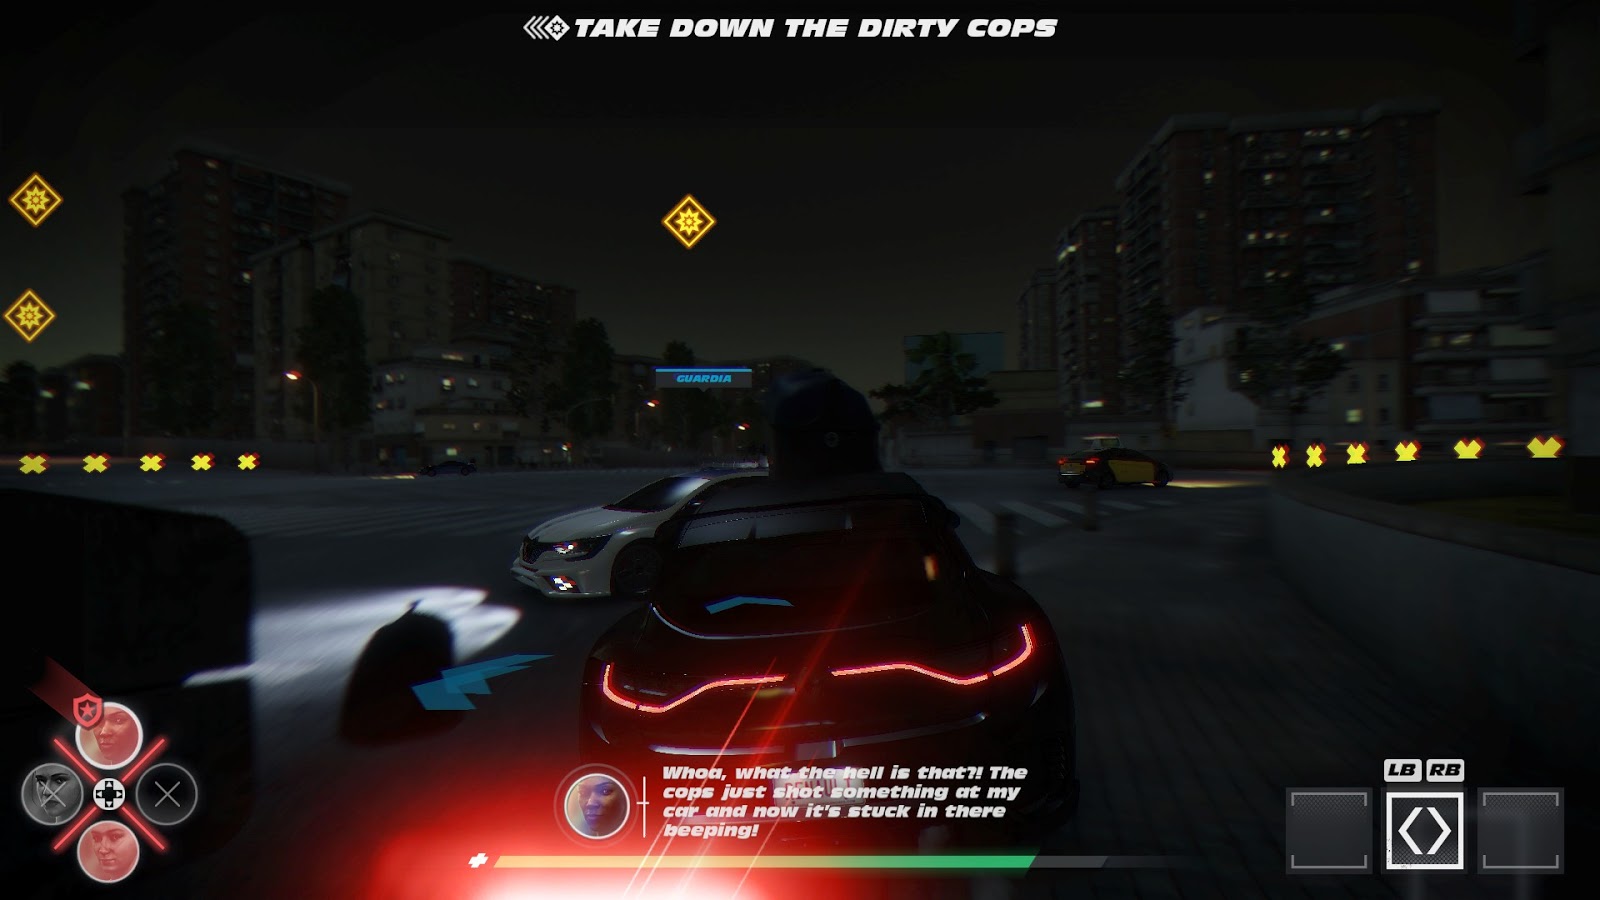 The cops are dirty because they are trying to stop us from stealing cars.  (Screenshot: Bandai Namco)